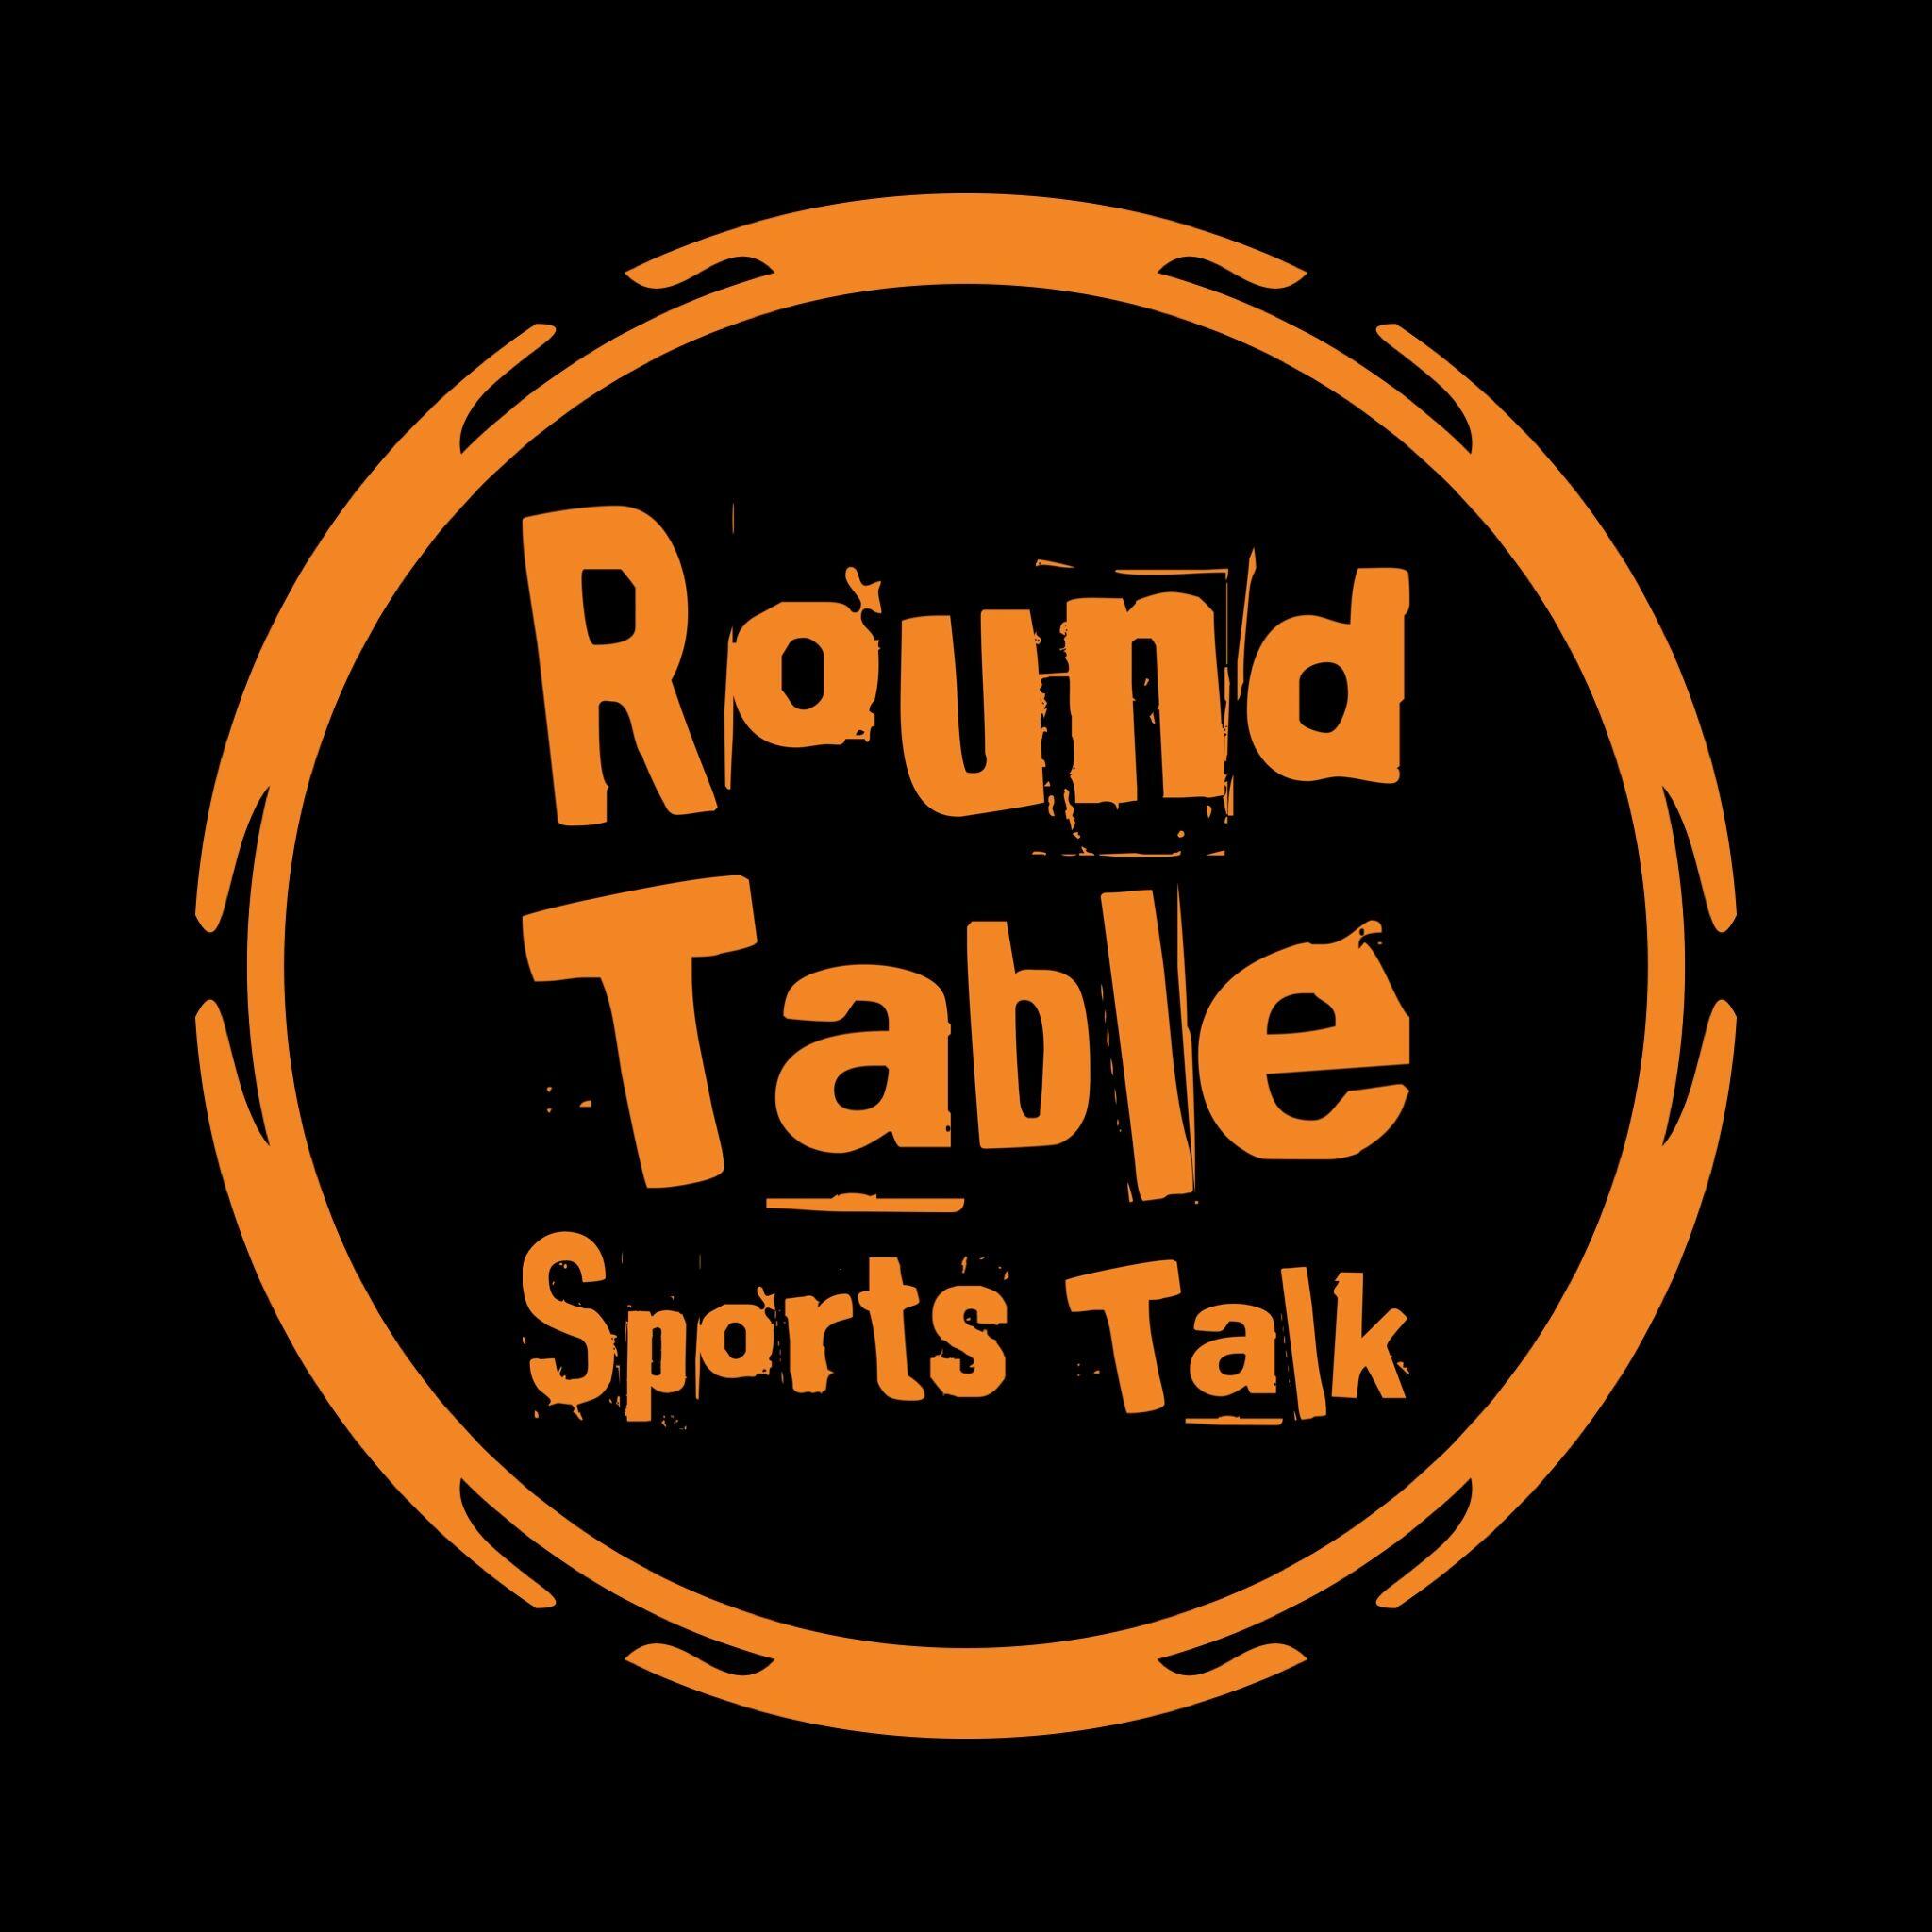 First Round. The game Design Round Table Podcast. Talk round